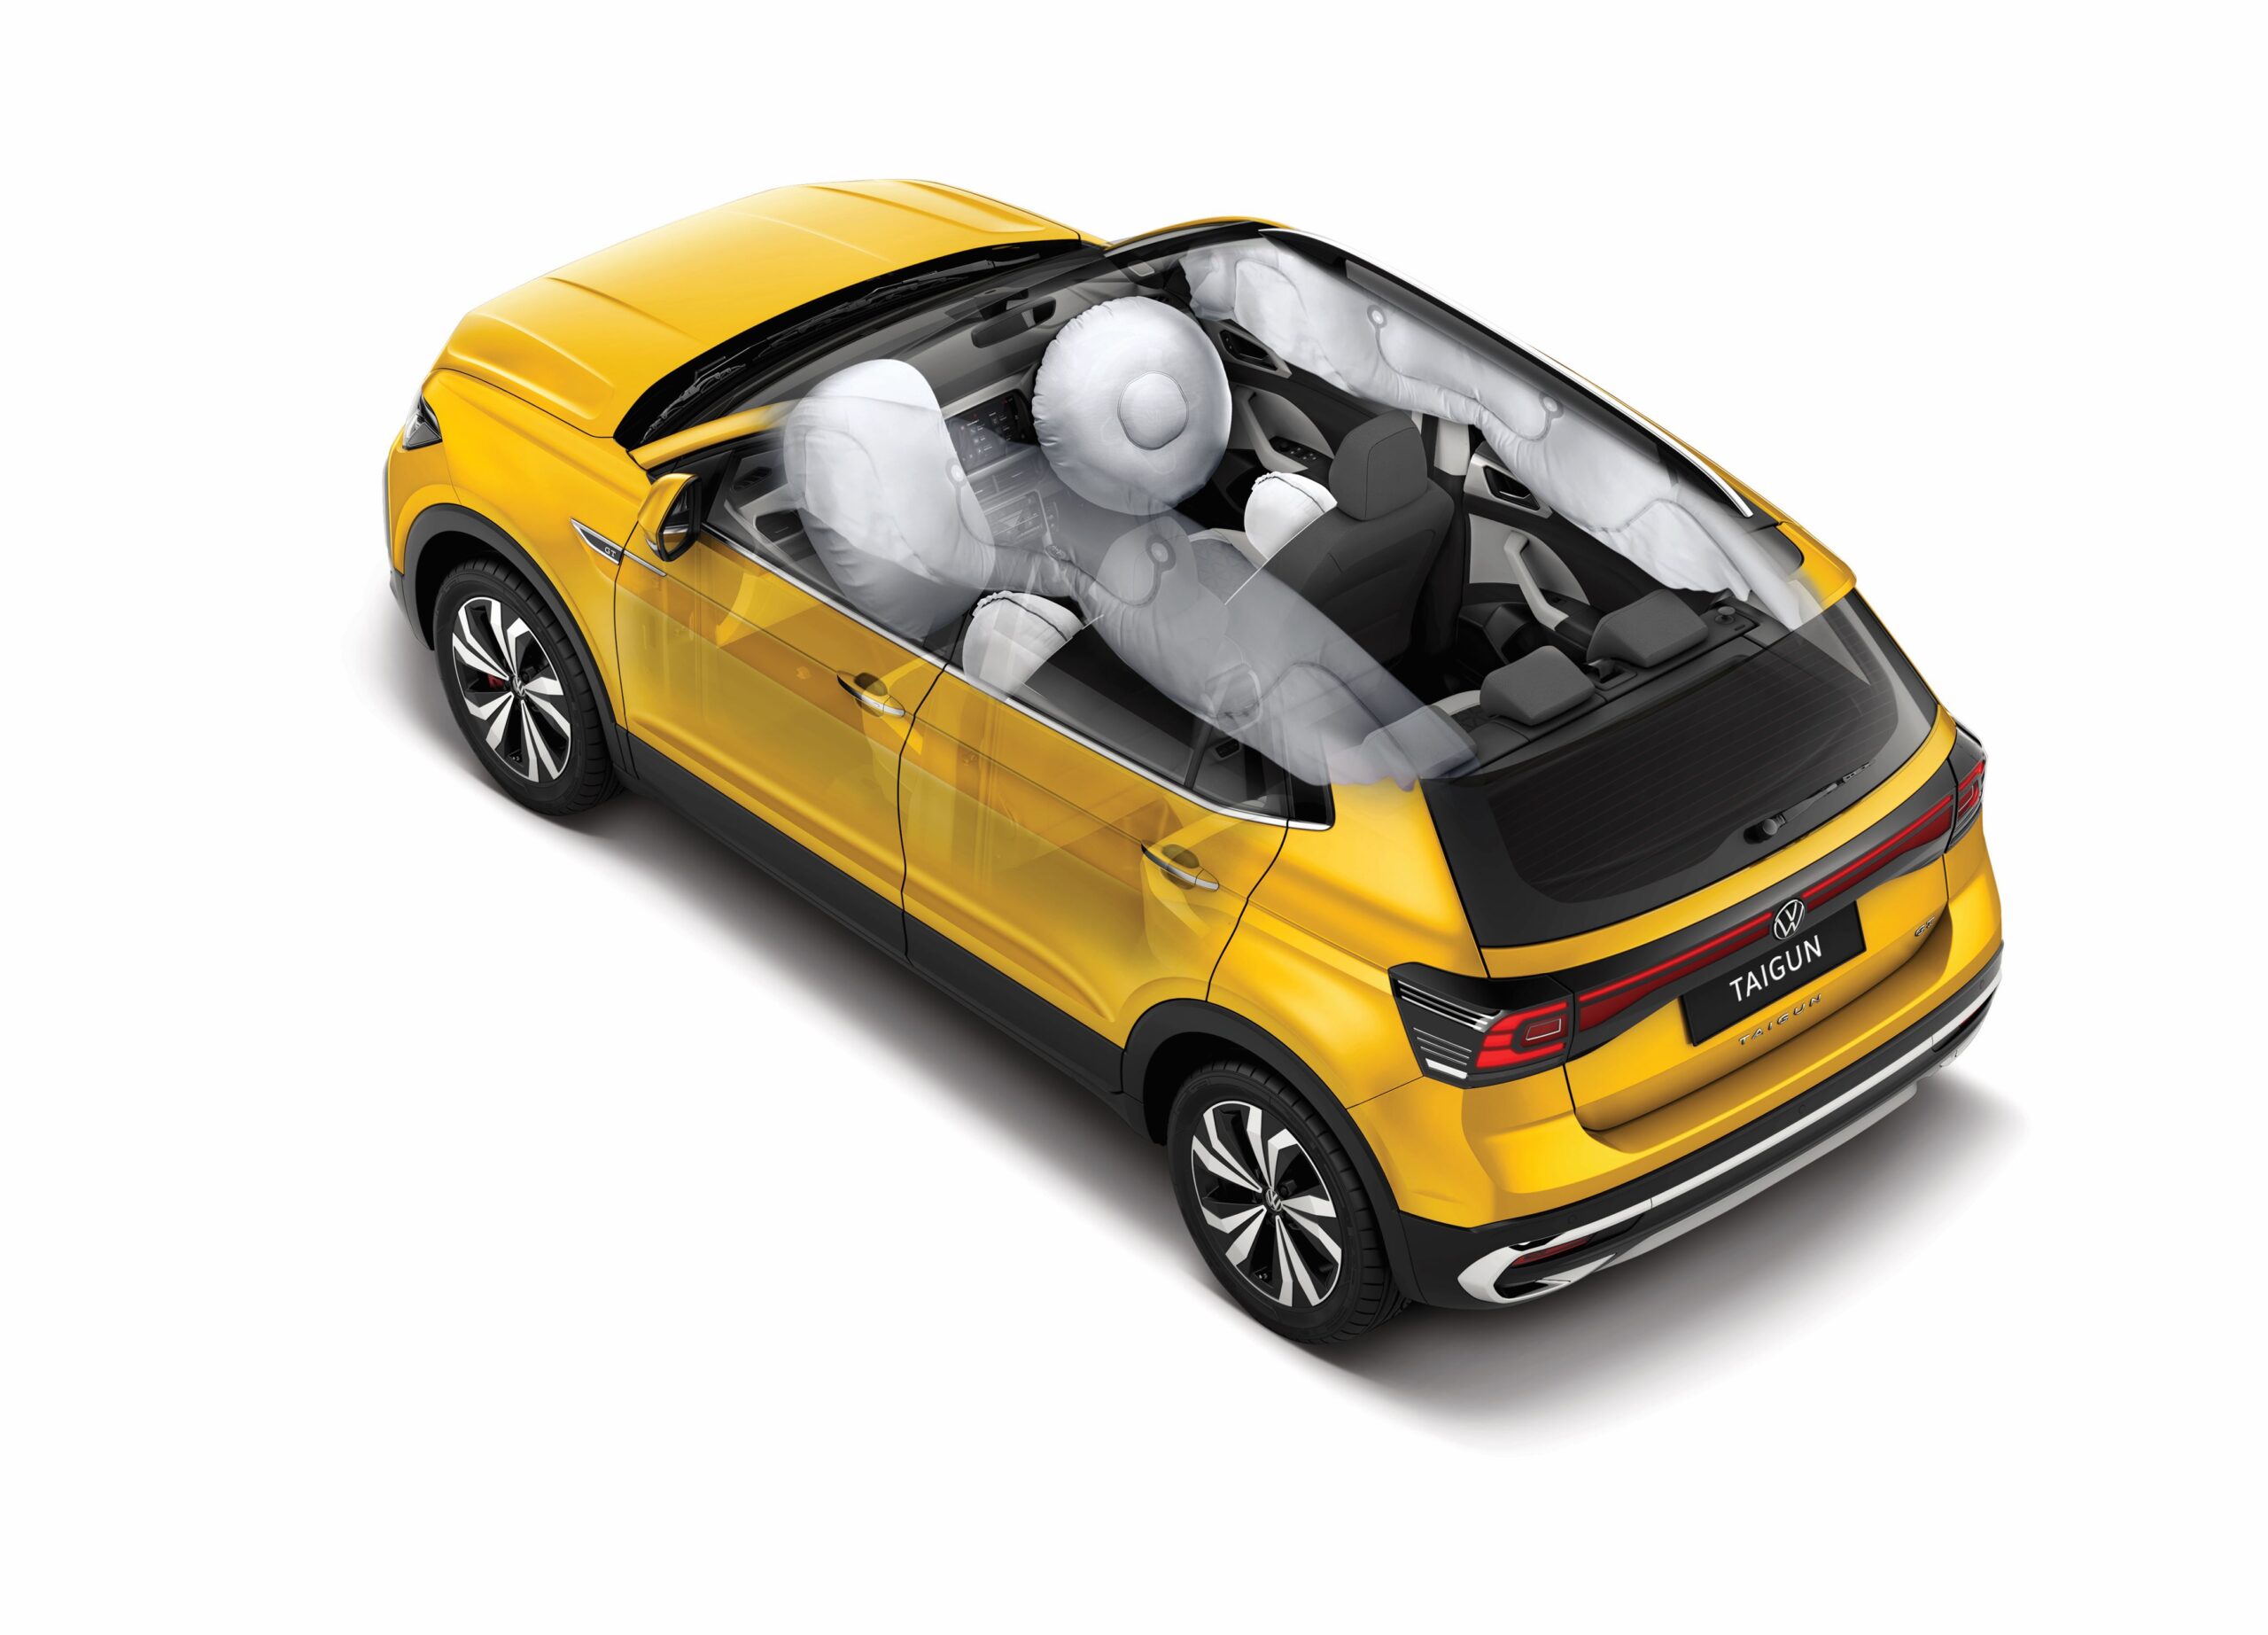 Volkswagen India makes 6 airbags standard across its 5-Star GNCAP rated model line-up